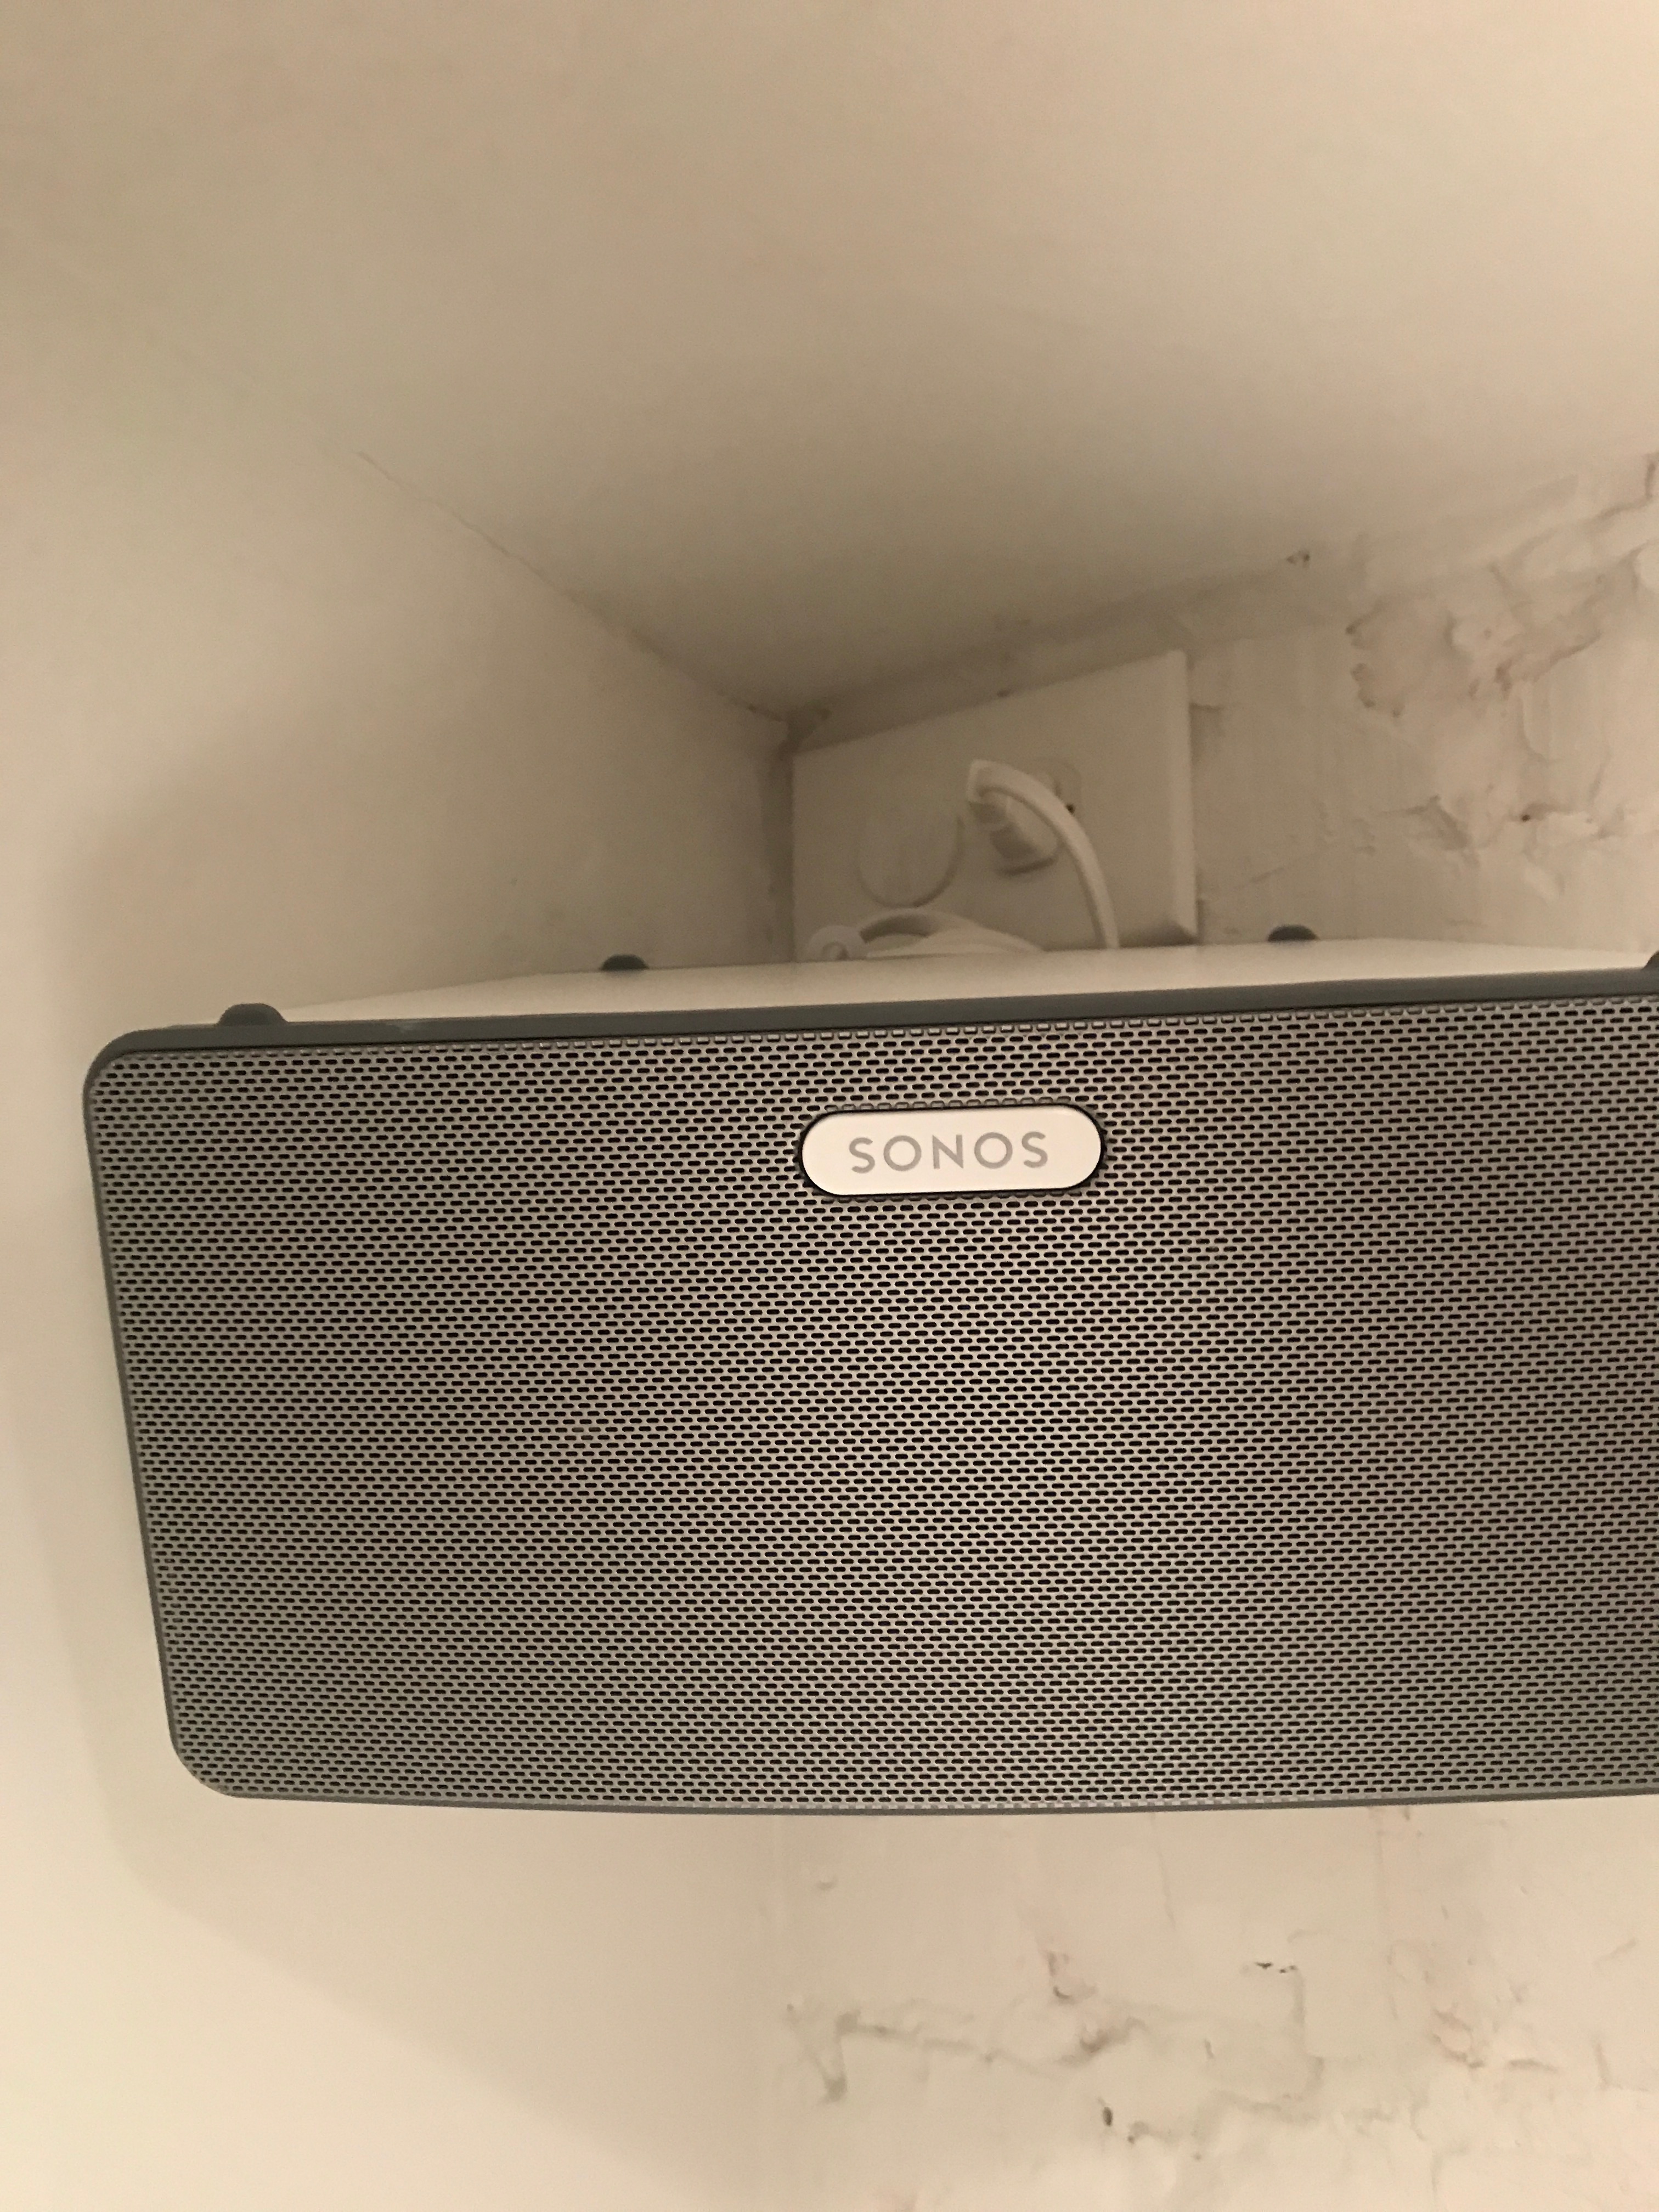 Mounting Play 3 Close To Ceiling Sonos Community